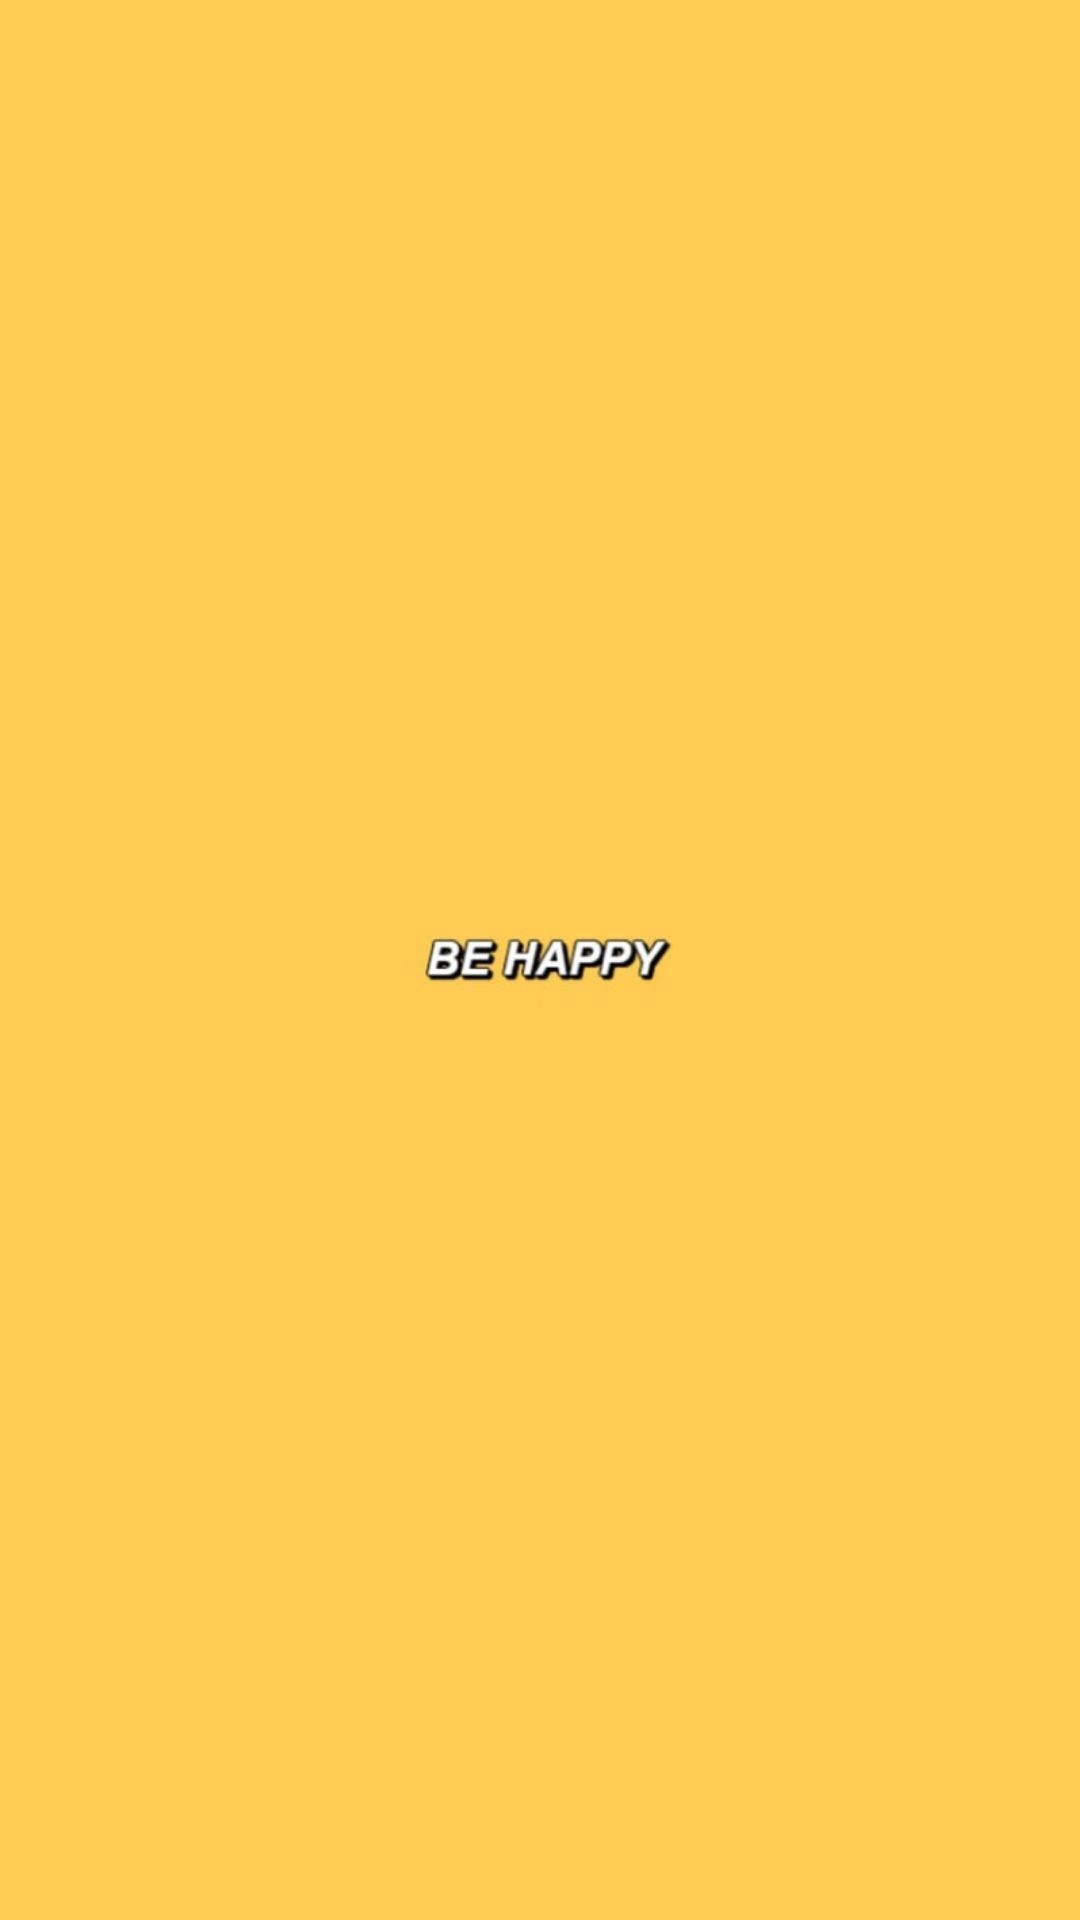 Download Be Happy Aesthetic Profile Wallpaper